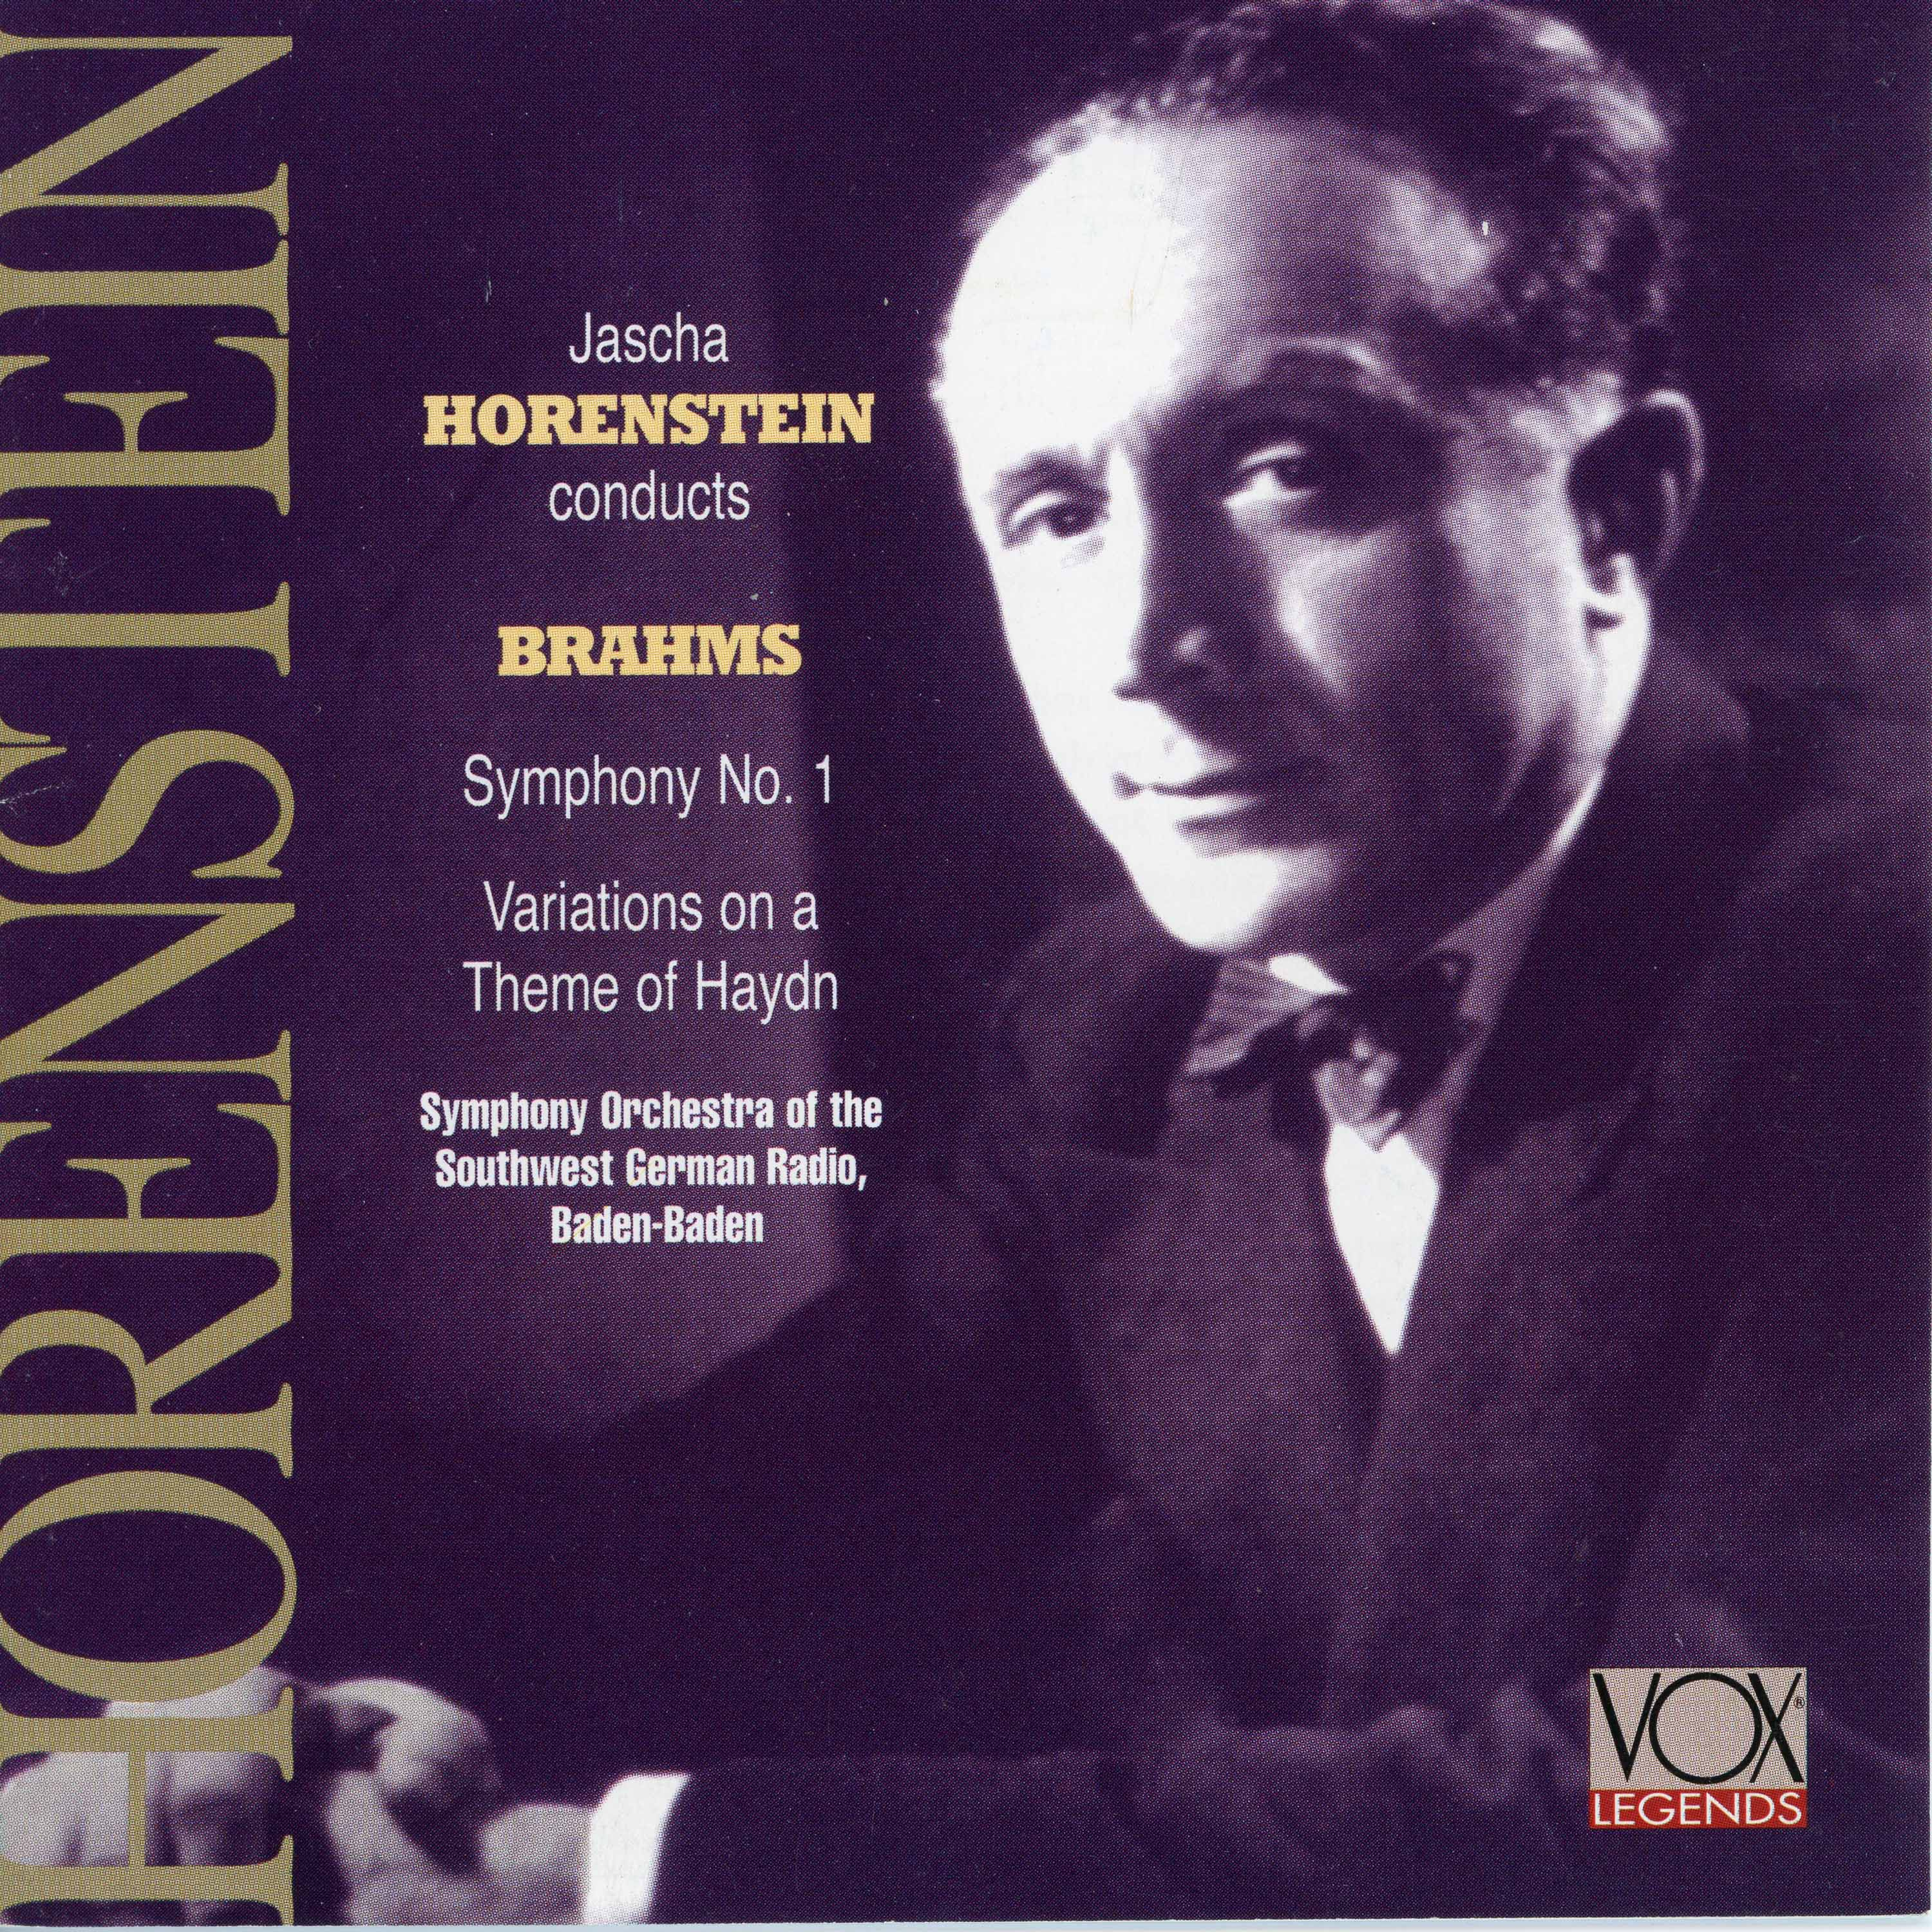 Variations on a Theme by Haydn, Op. 56a "St. Anthony Variations":Variations on a Theme by Haydn, Op. 56a "St. Anthony Variations": Var. 4, Andante con moto